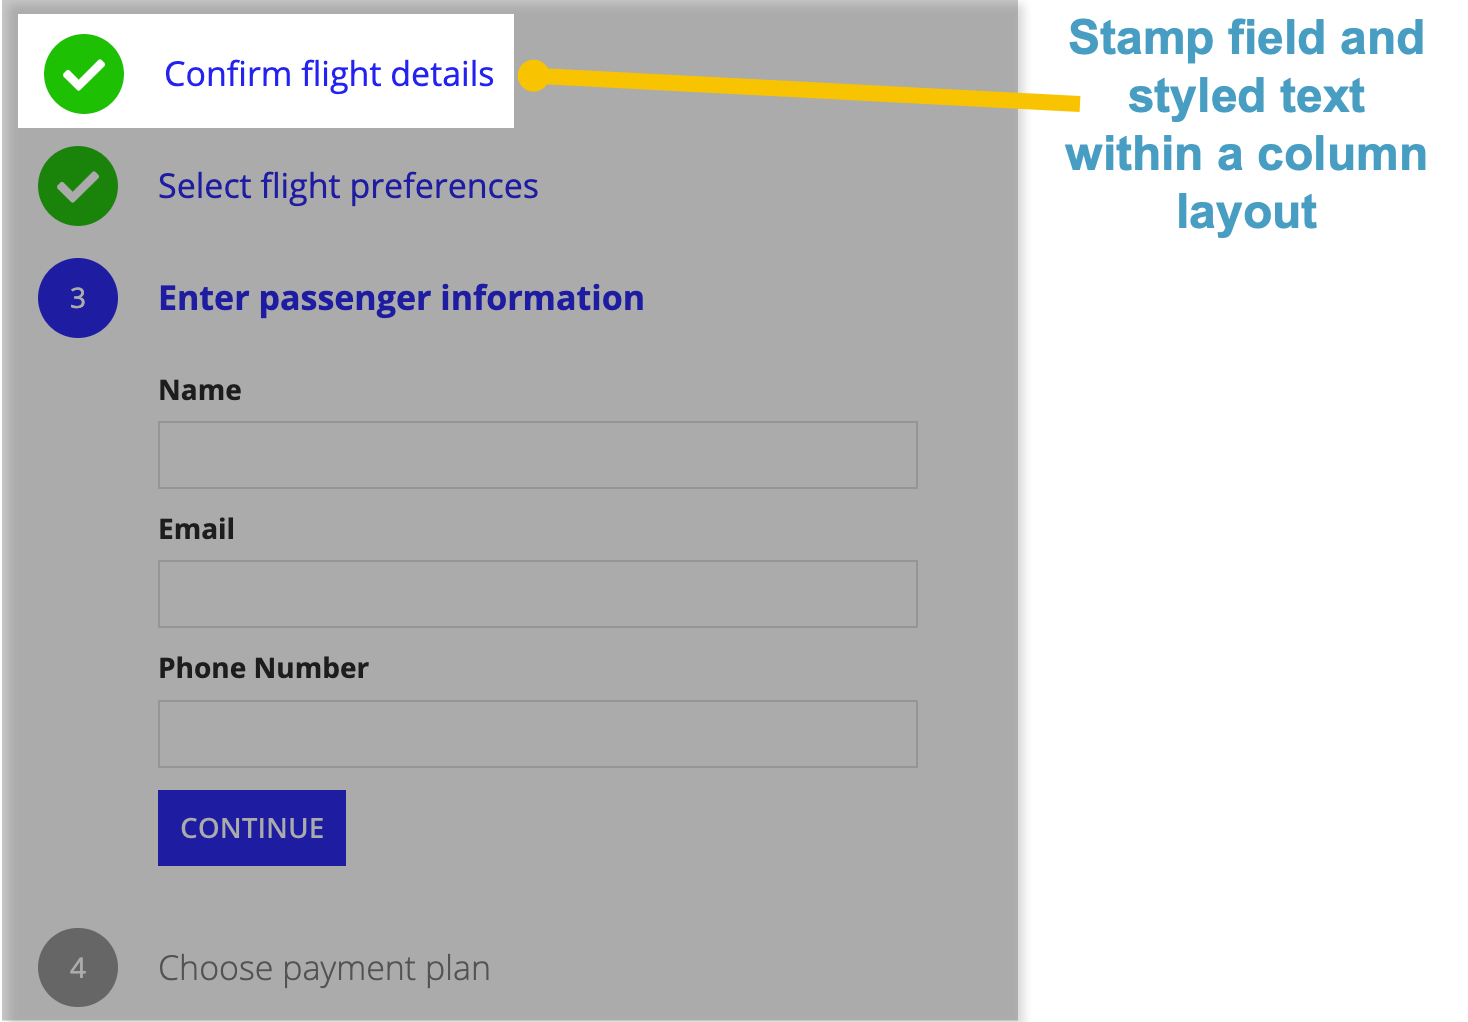 screenshot of the form steps pattern highlighing that there is a stamp field and styled text within a columns layout